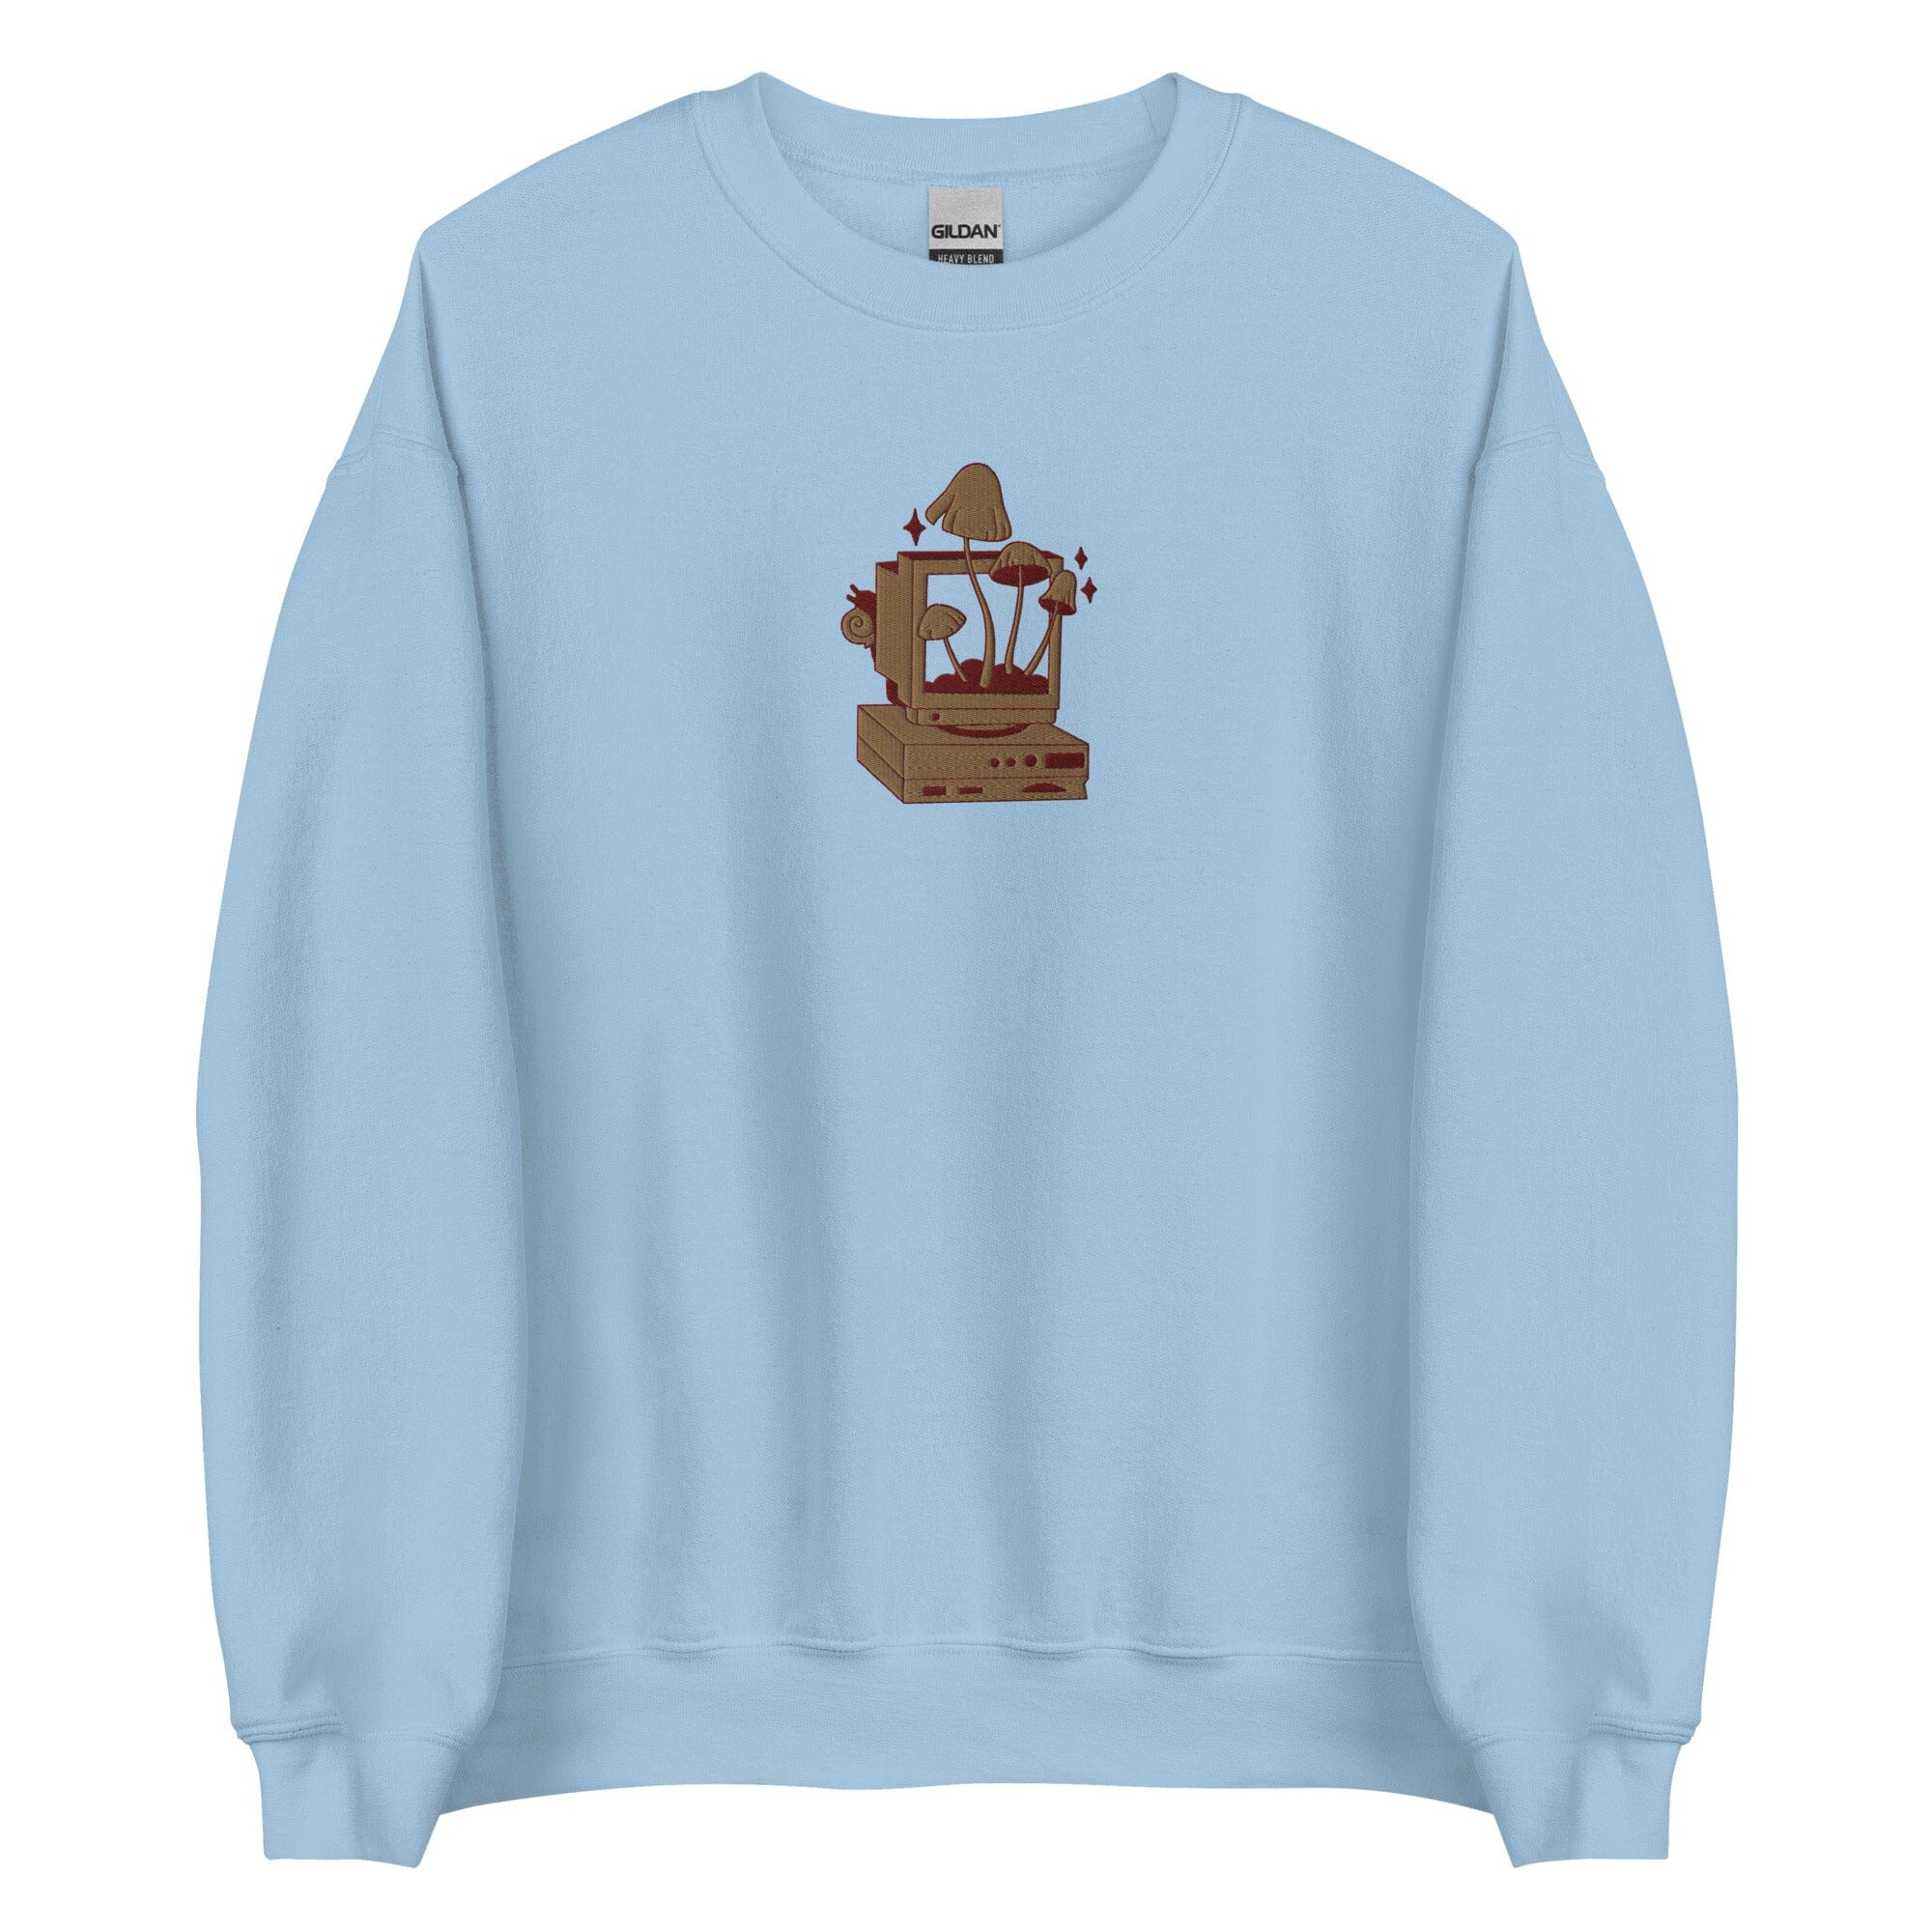 Cozy PC Gaming | Embroidered Unisex Sweatshirt | Cozy Gamer Threads & Thistles Inventory Light Blue S 